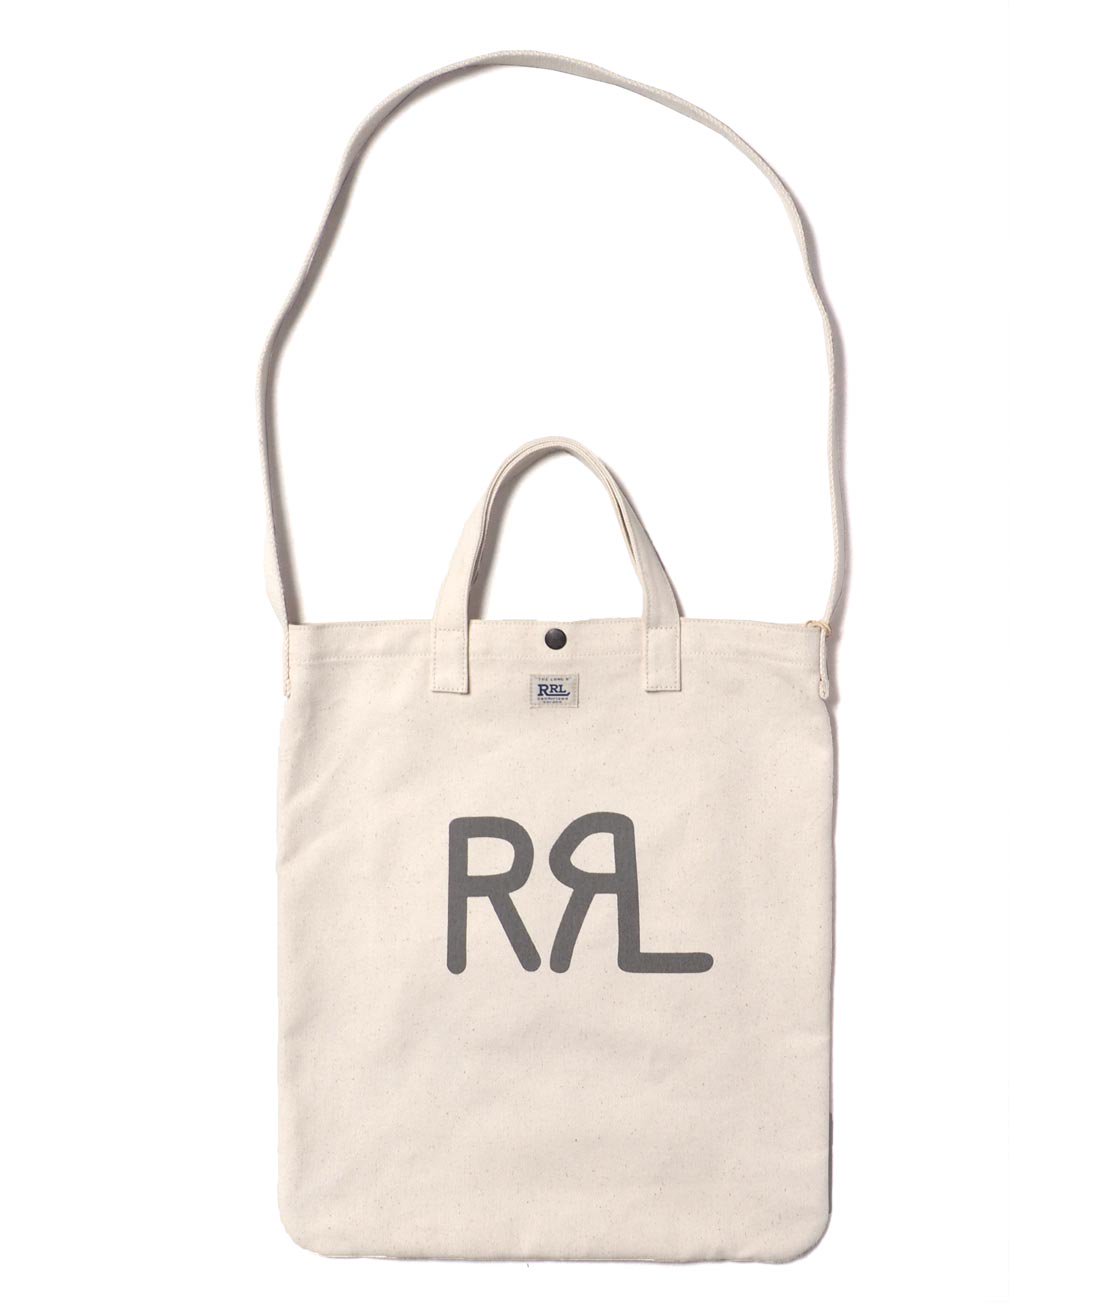 RRL】SEEDED CANVAS MARKET TOTE - NATURAL マーケットトート バッグ ...